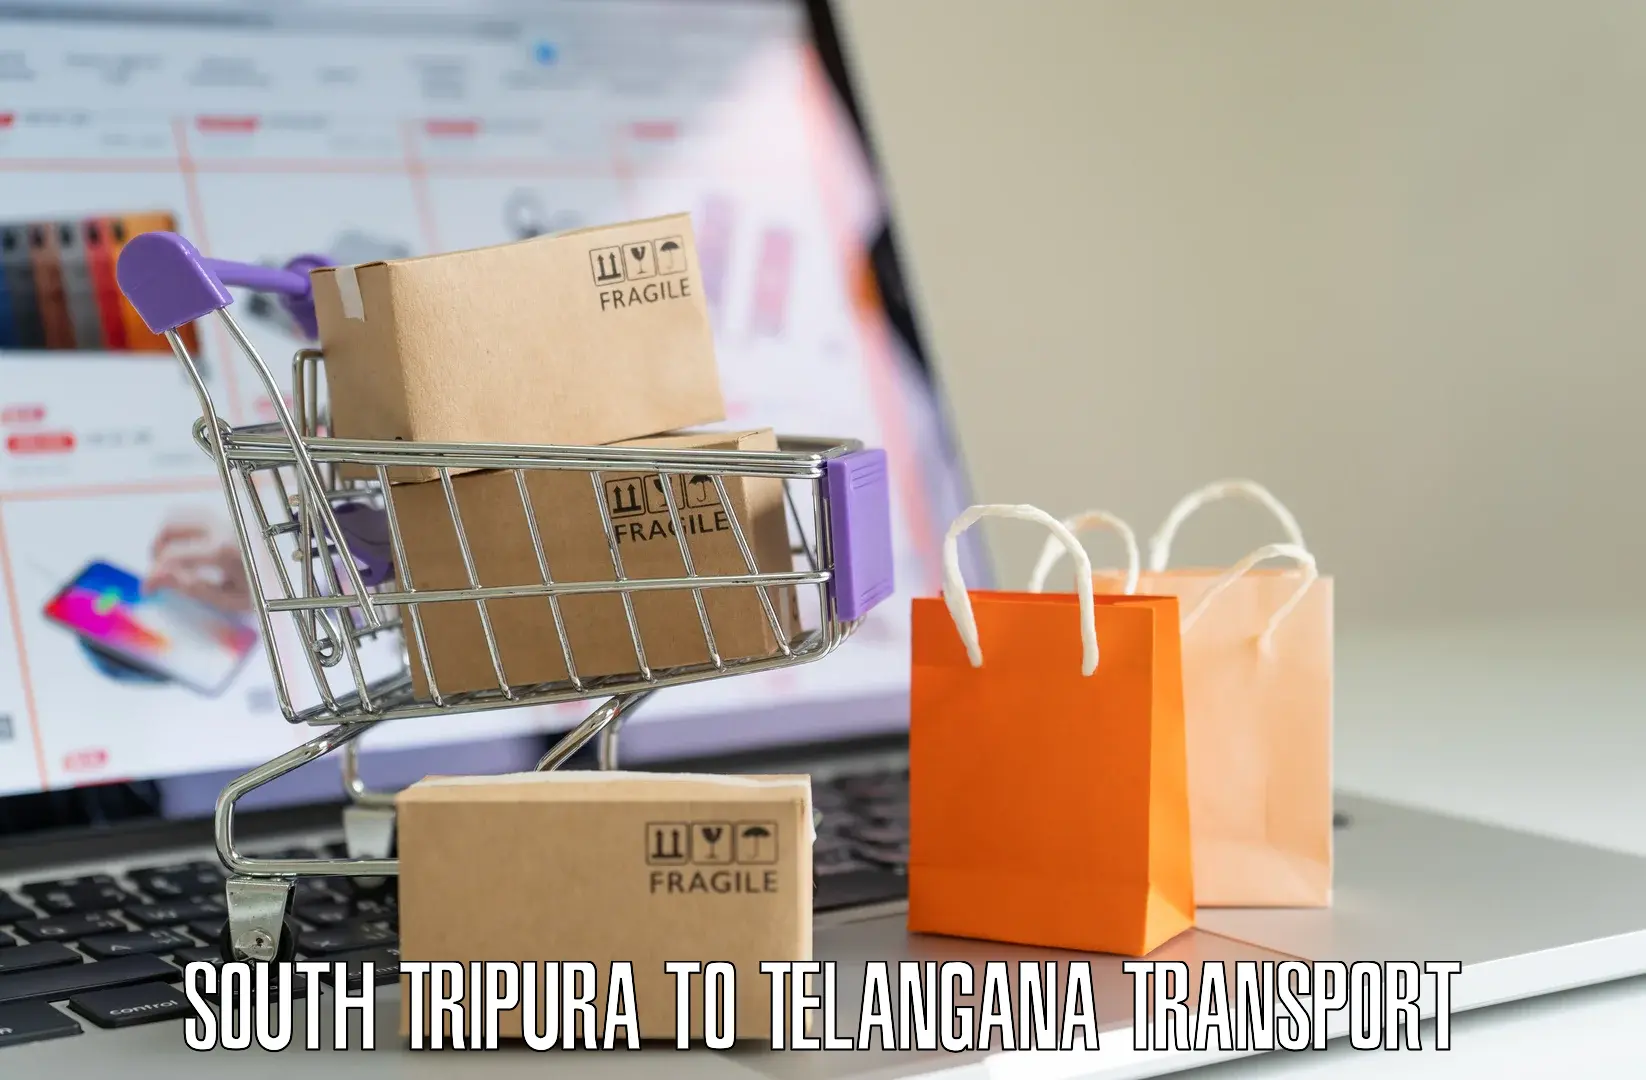 Online transport booking South Tripura to Mahabubabad